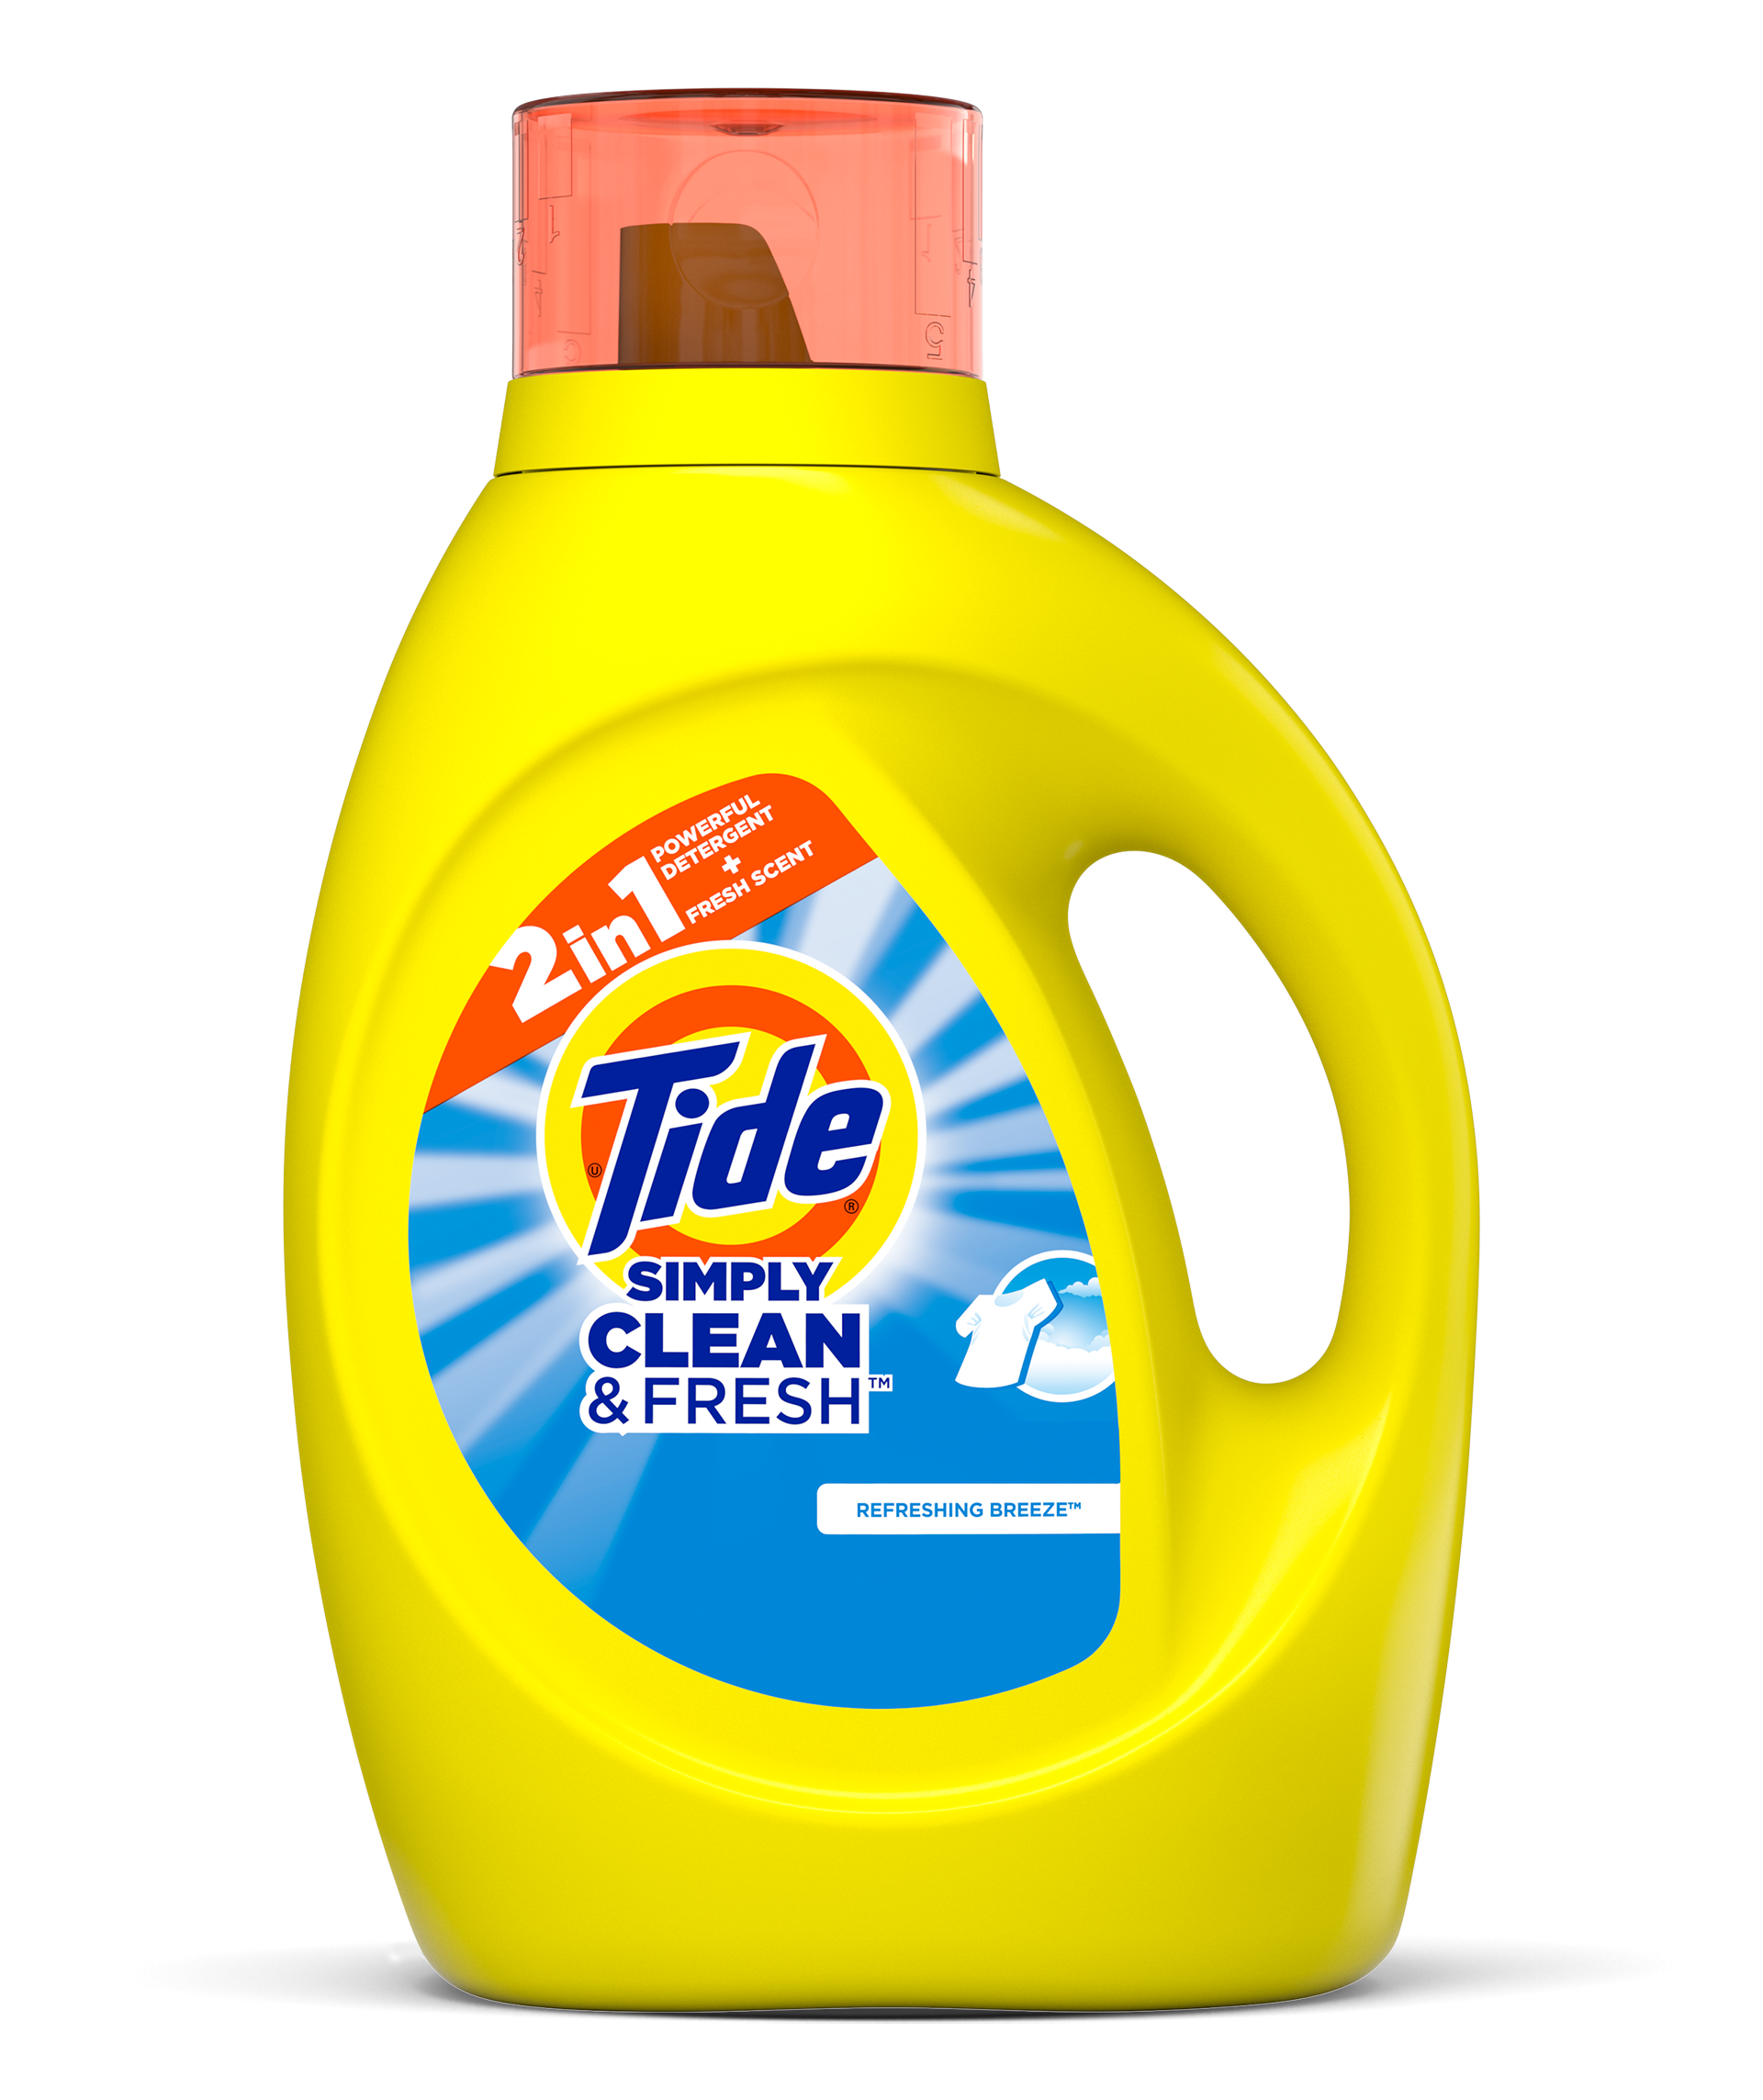 Tide Simply Clean and Fresh Liquid Laundry Detergent